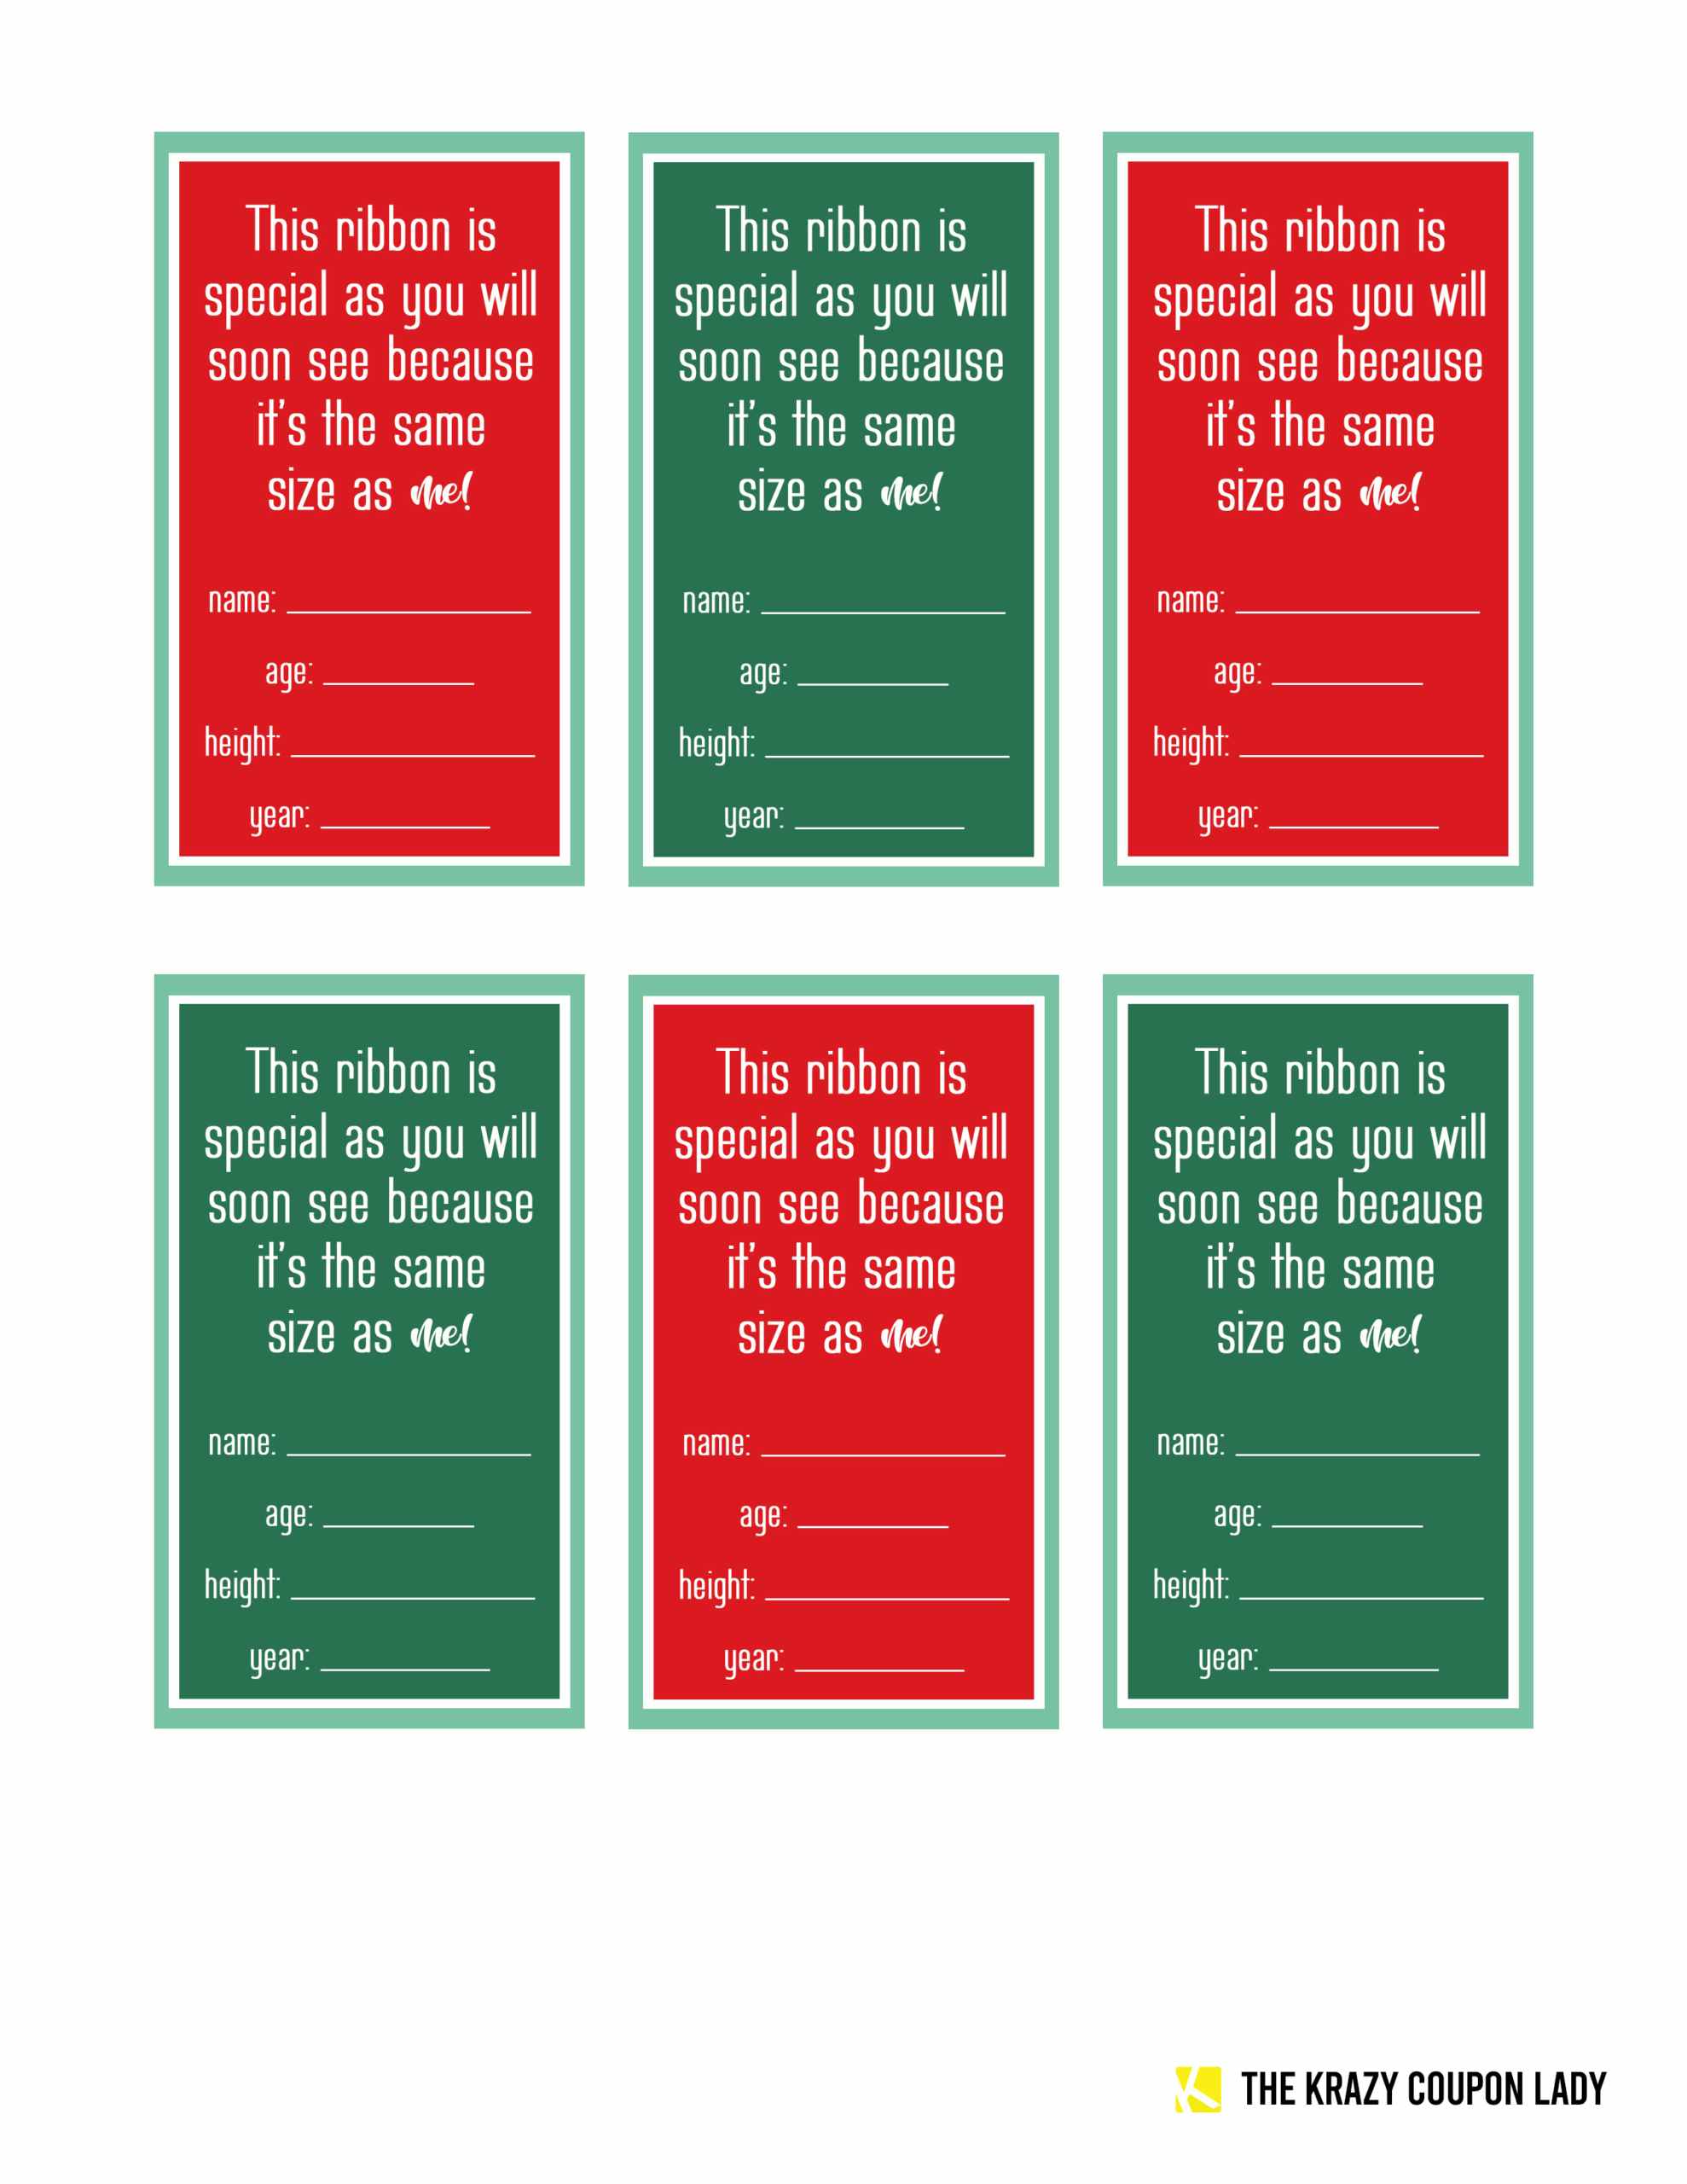 Christmas ornament print outs that read, "This ribbon is special, as you will soon see because its the same size as me!" with lines for ...